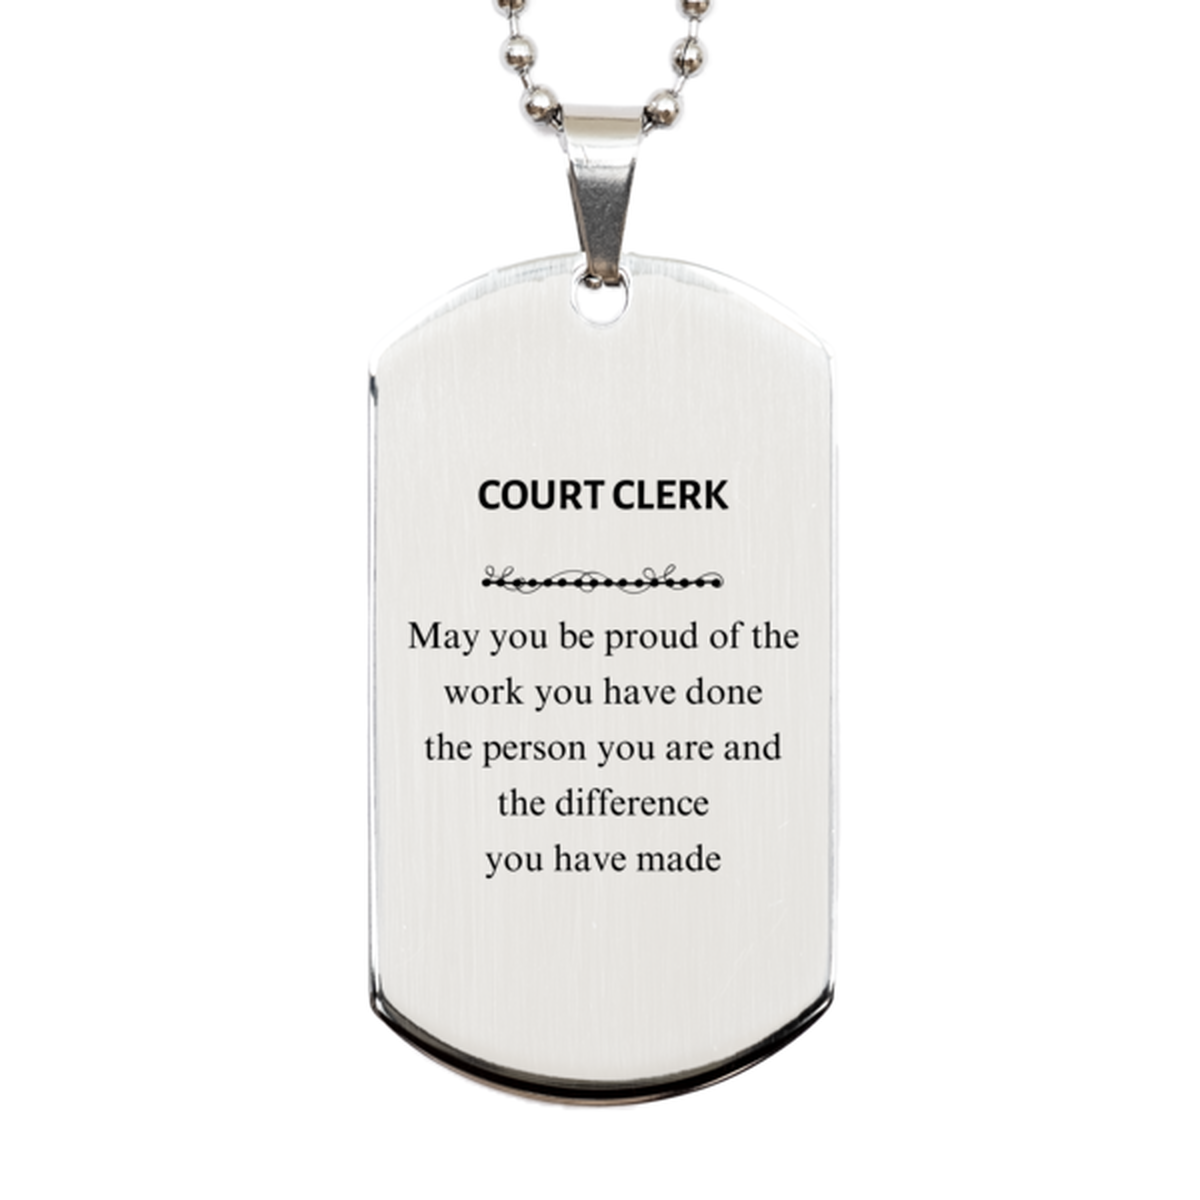 Court Clerk May you be proud of the work you have done, Retirement Court Clerk Silver Dog Tag for Colleague Appreciation Gifts Amazing for Court Clerk